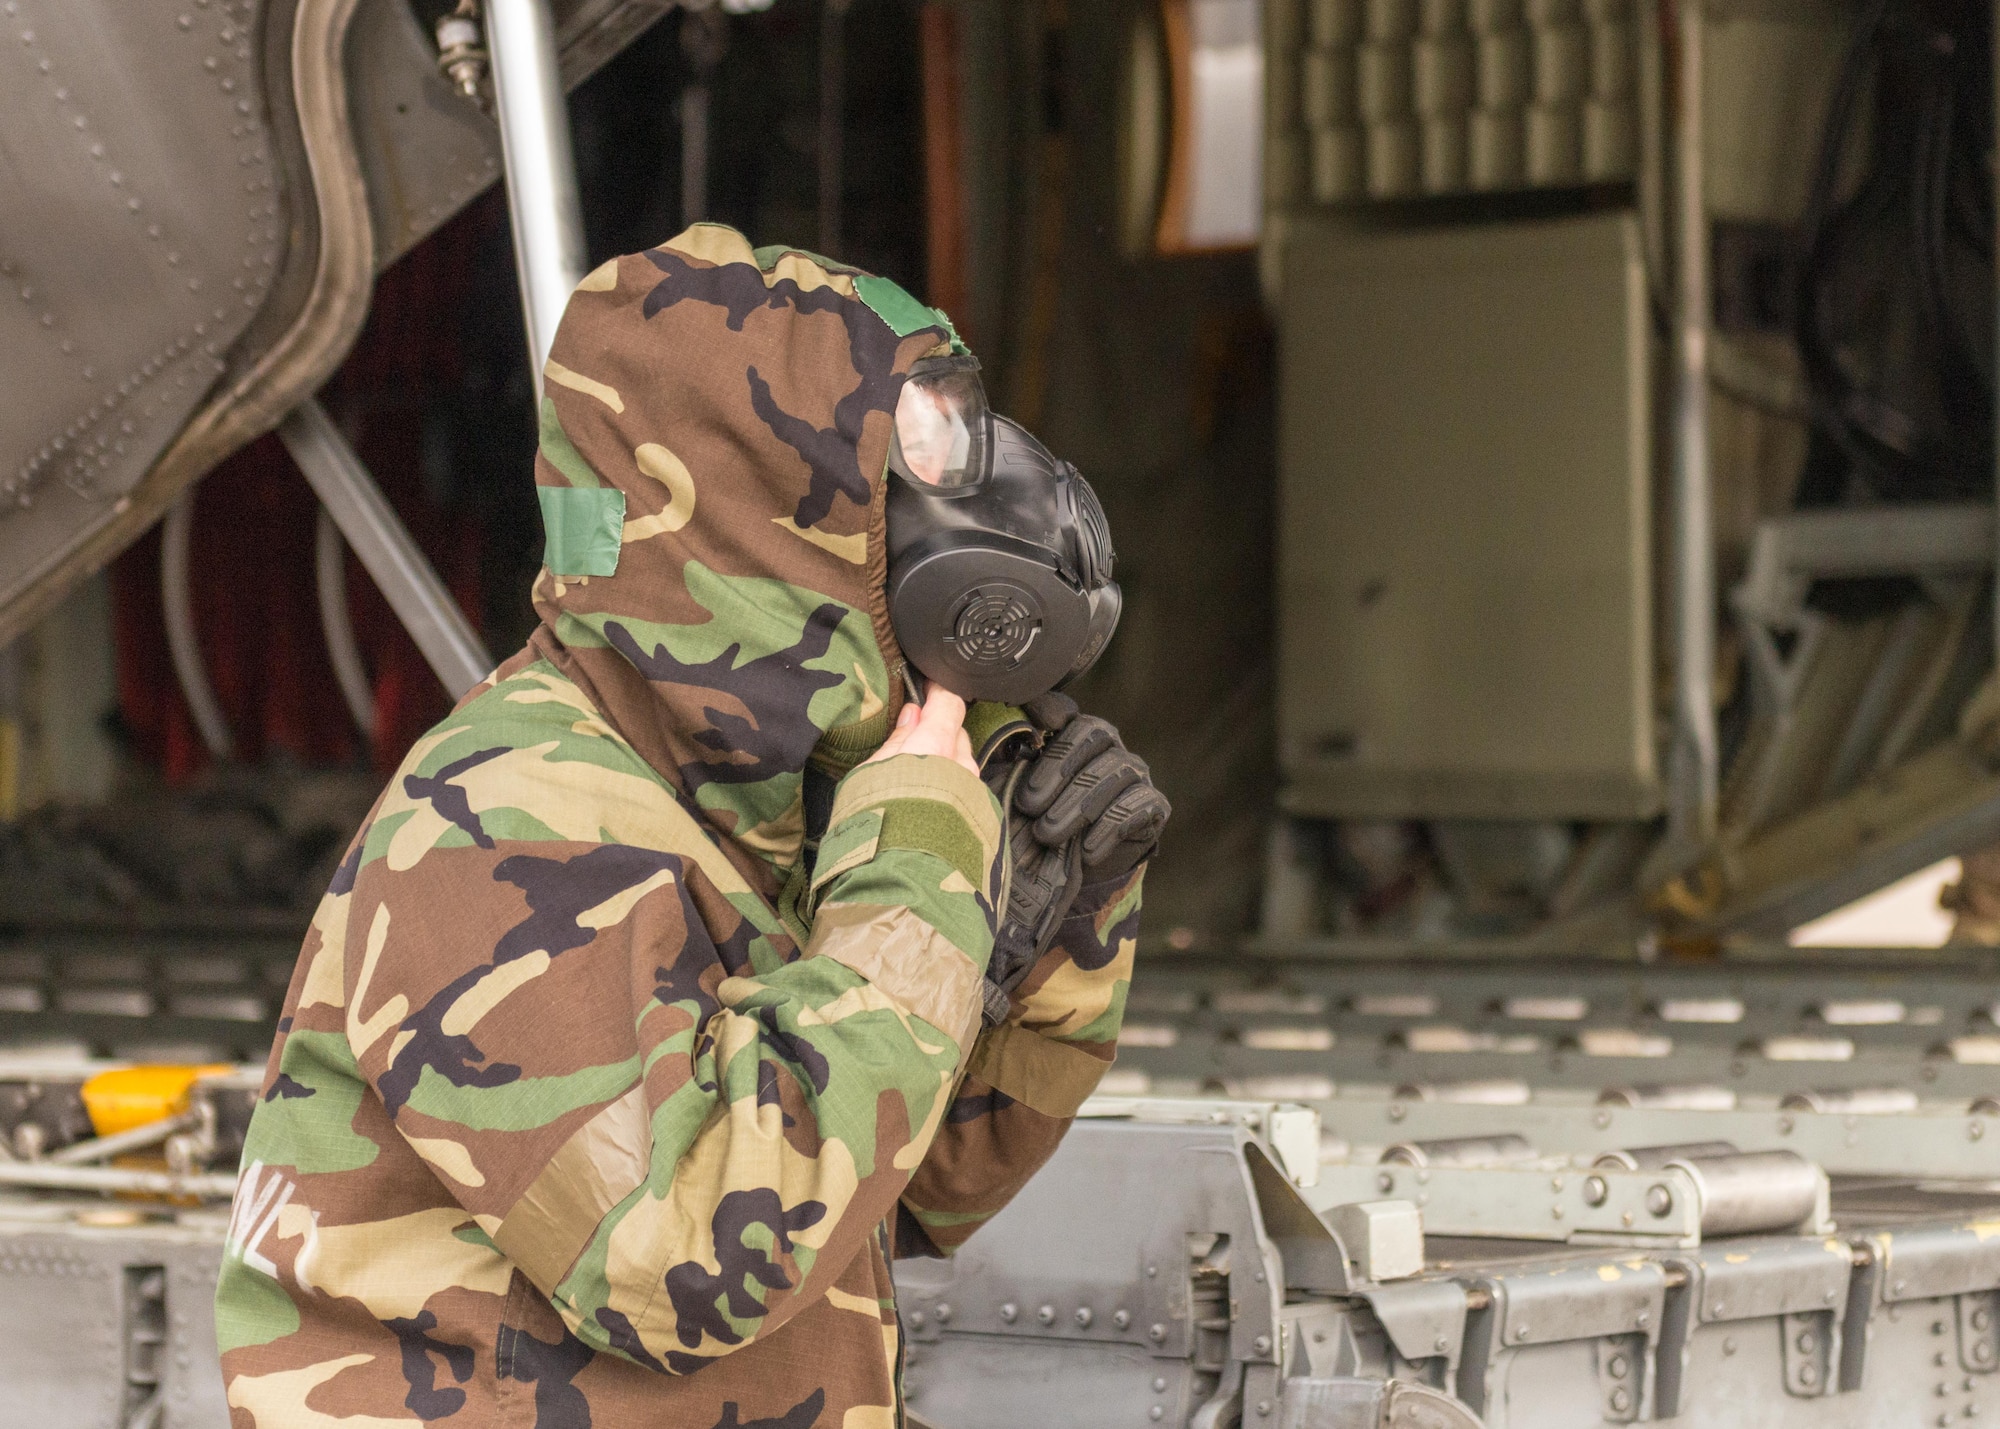 An Airman adjusts his gas mask and personal protective equipment at Little Rock Air Force Base, Arkansas, June 5, 2021. ‘Port Dawgs’ from the 189th Aerial Port Flight, Air National Guard, and from the 96th Aerial Port Squadron, Air Force Reserve, created a joint training event focused on aerial port operations at Little Rock Air Force Base, Arkansas, June 3-6, 2021. (U.S. Air Force photo by Senior Airman Julia Ford)